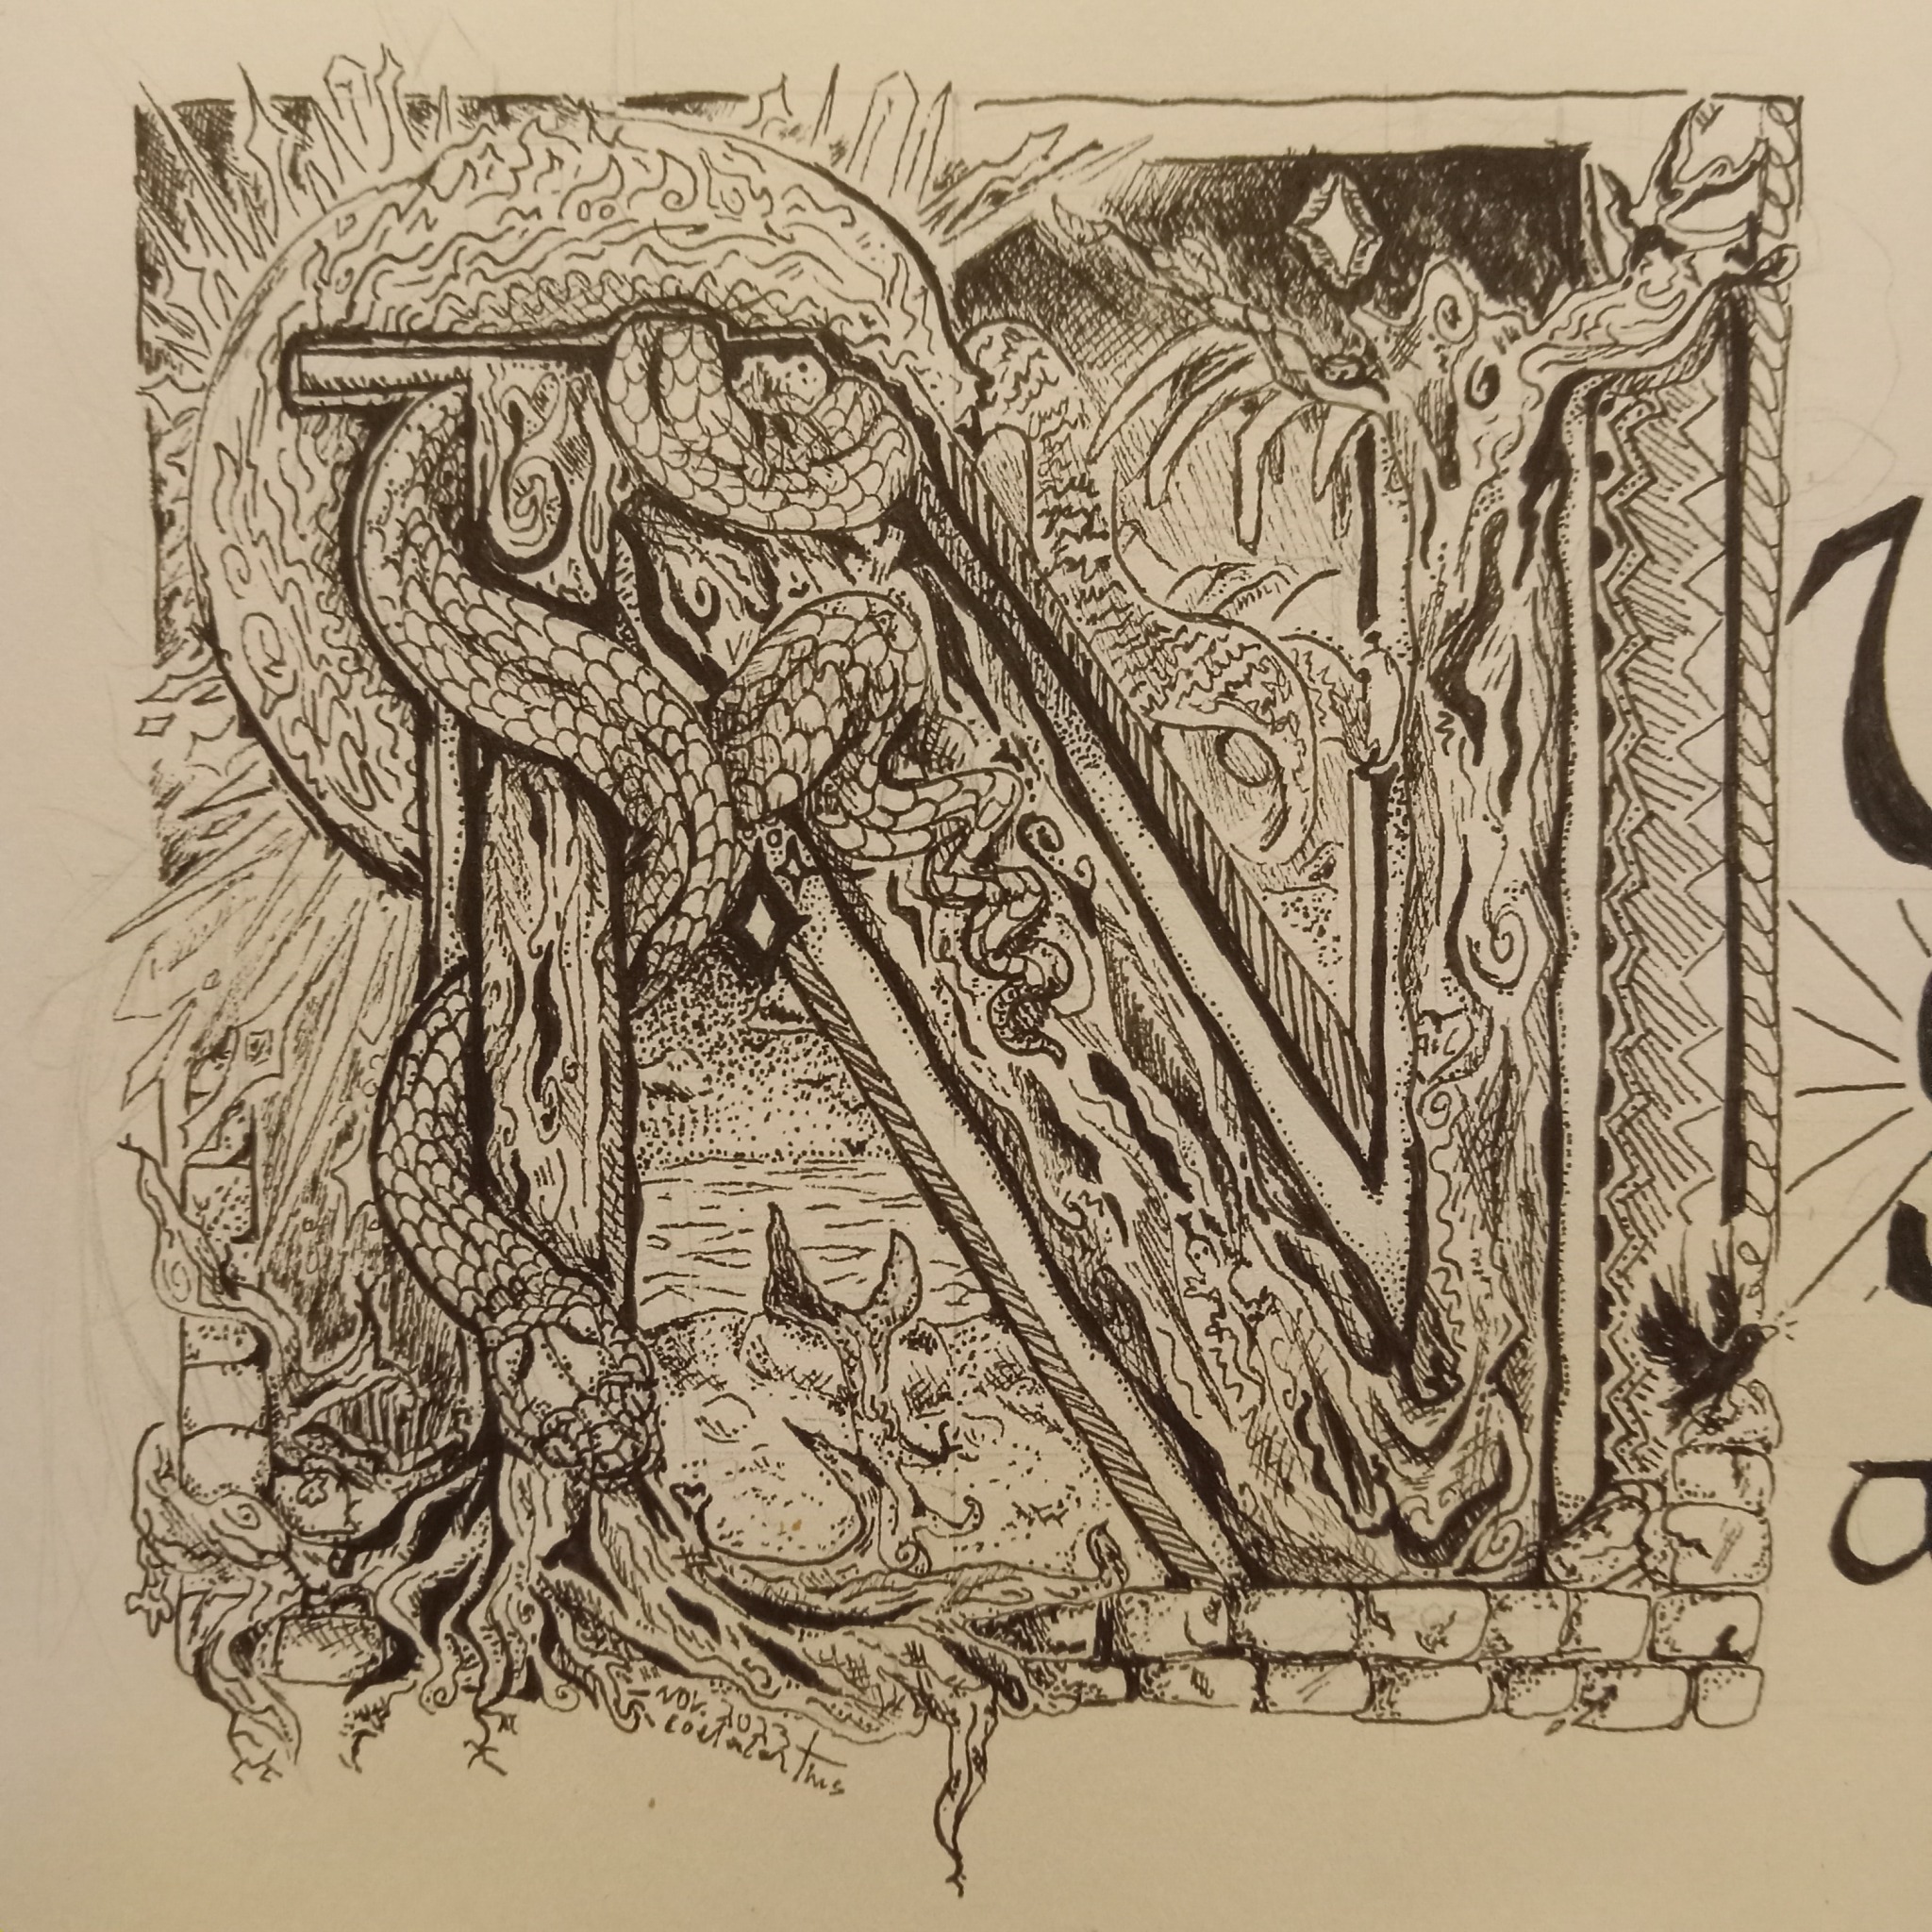 A very detailed initial letter N in ink. The letter itself is made of wood and a snake is curled around it.